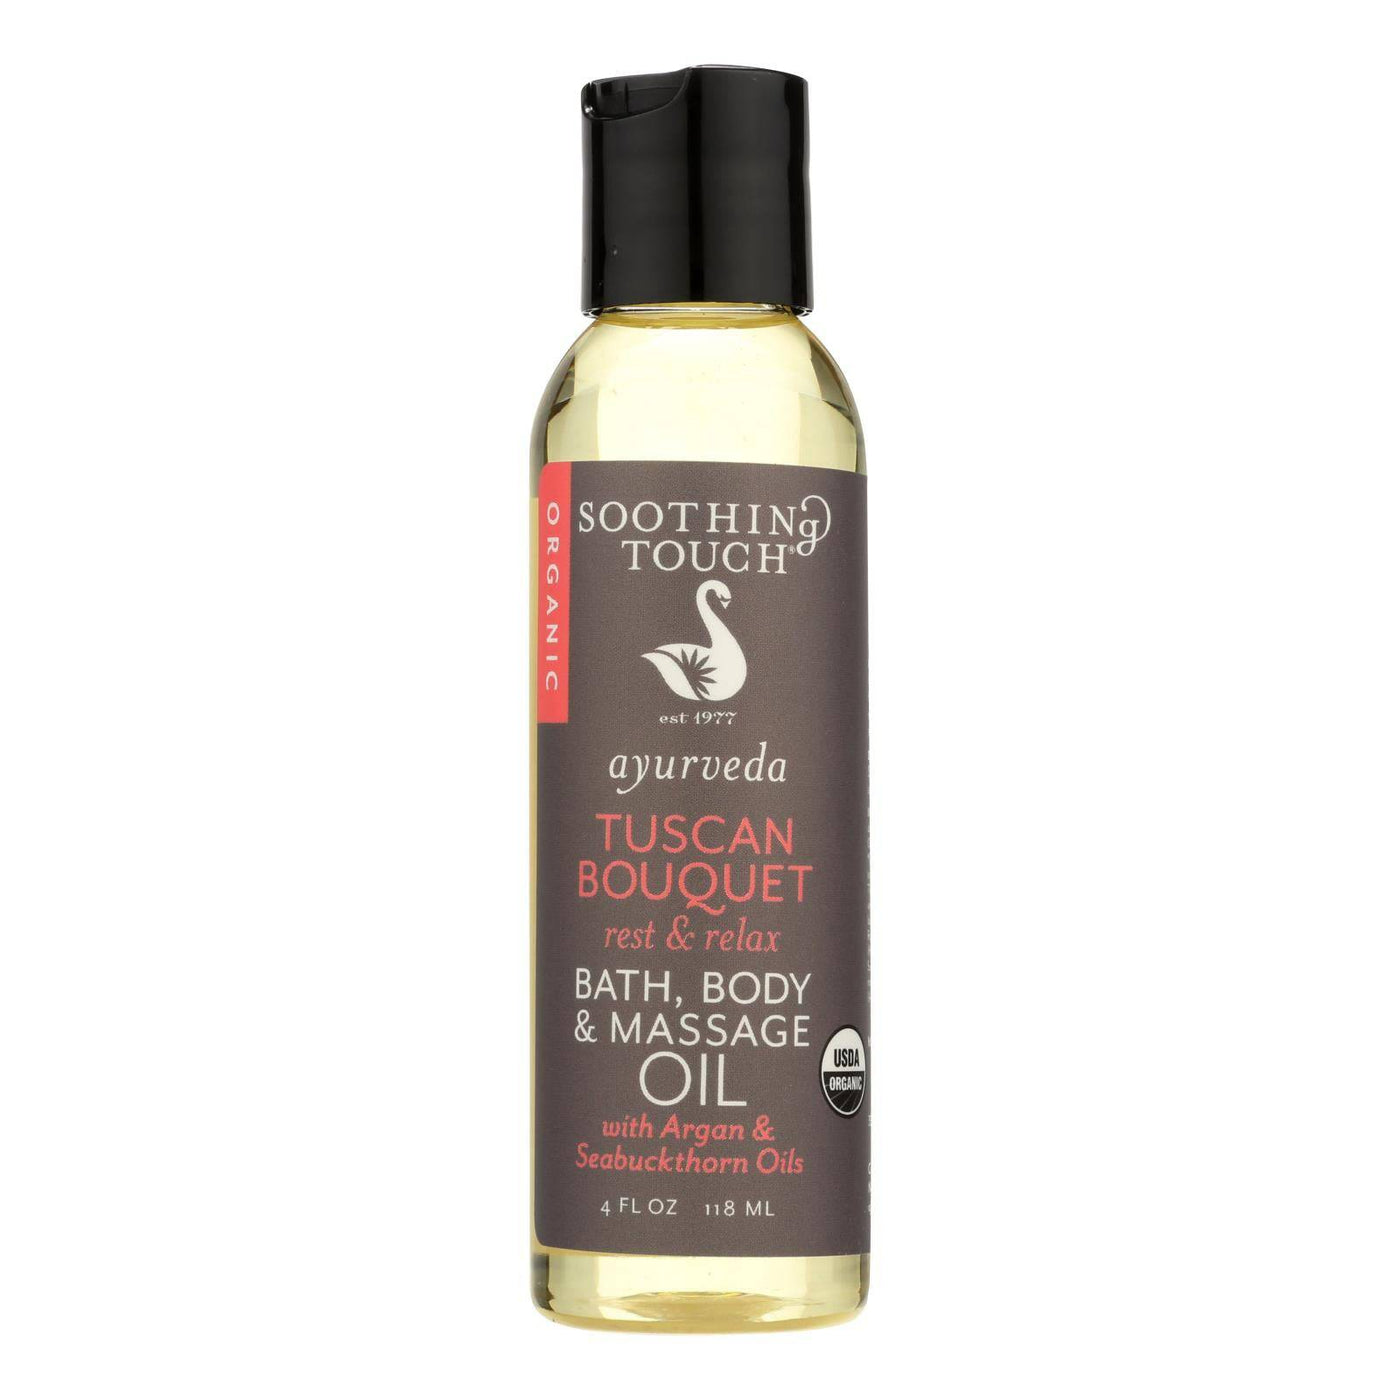 Soothing Touch Bath Body And Massage Oil - Ayurveda - Tuscan Bouqet - Rest And Relax - 4 Oz | OnlyNaturals.us